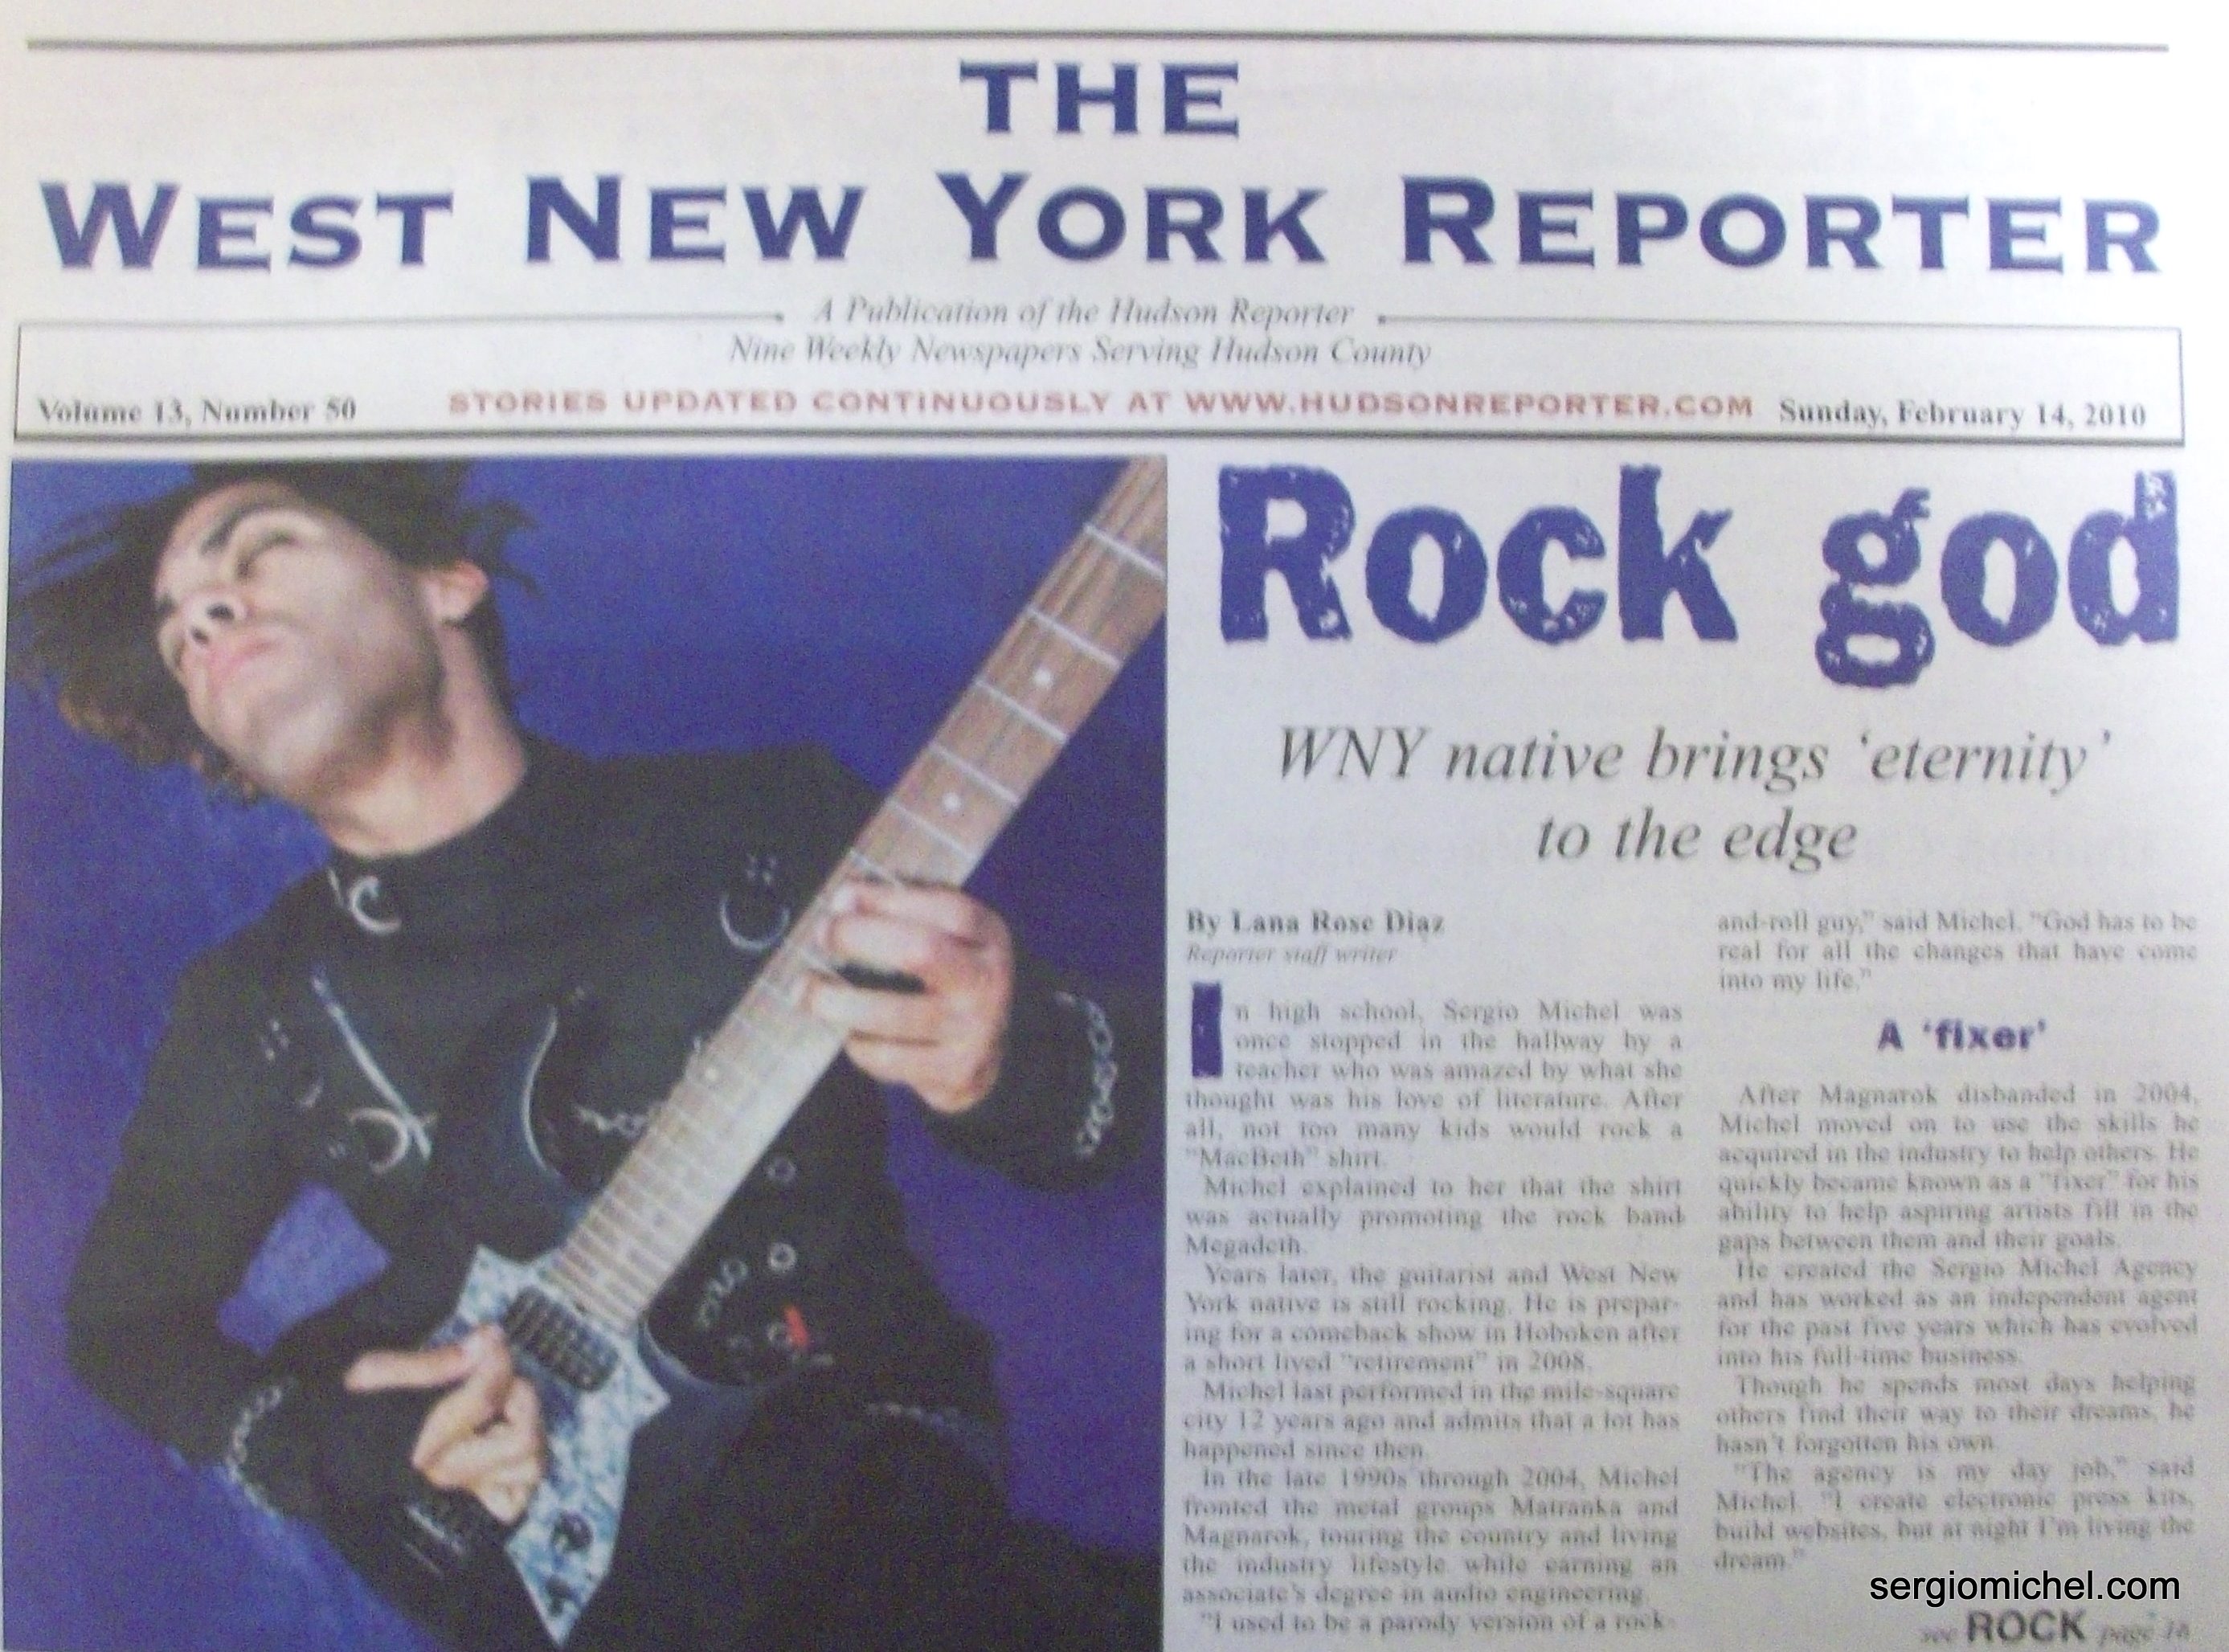 Cover story plus in depth interview/editorial. West New York Reporter (Volume 13, Number 50).